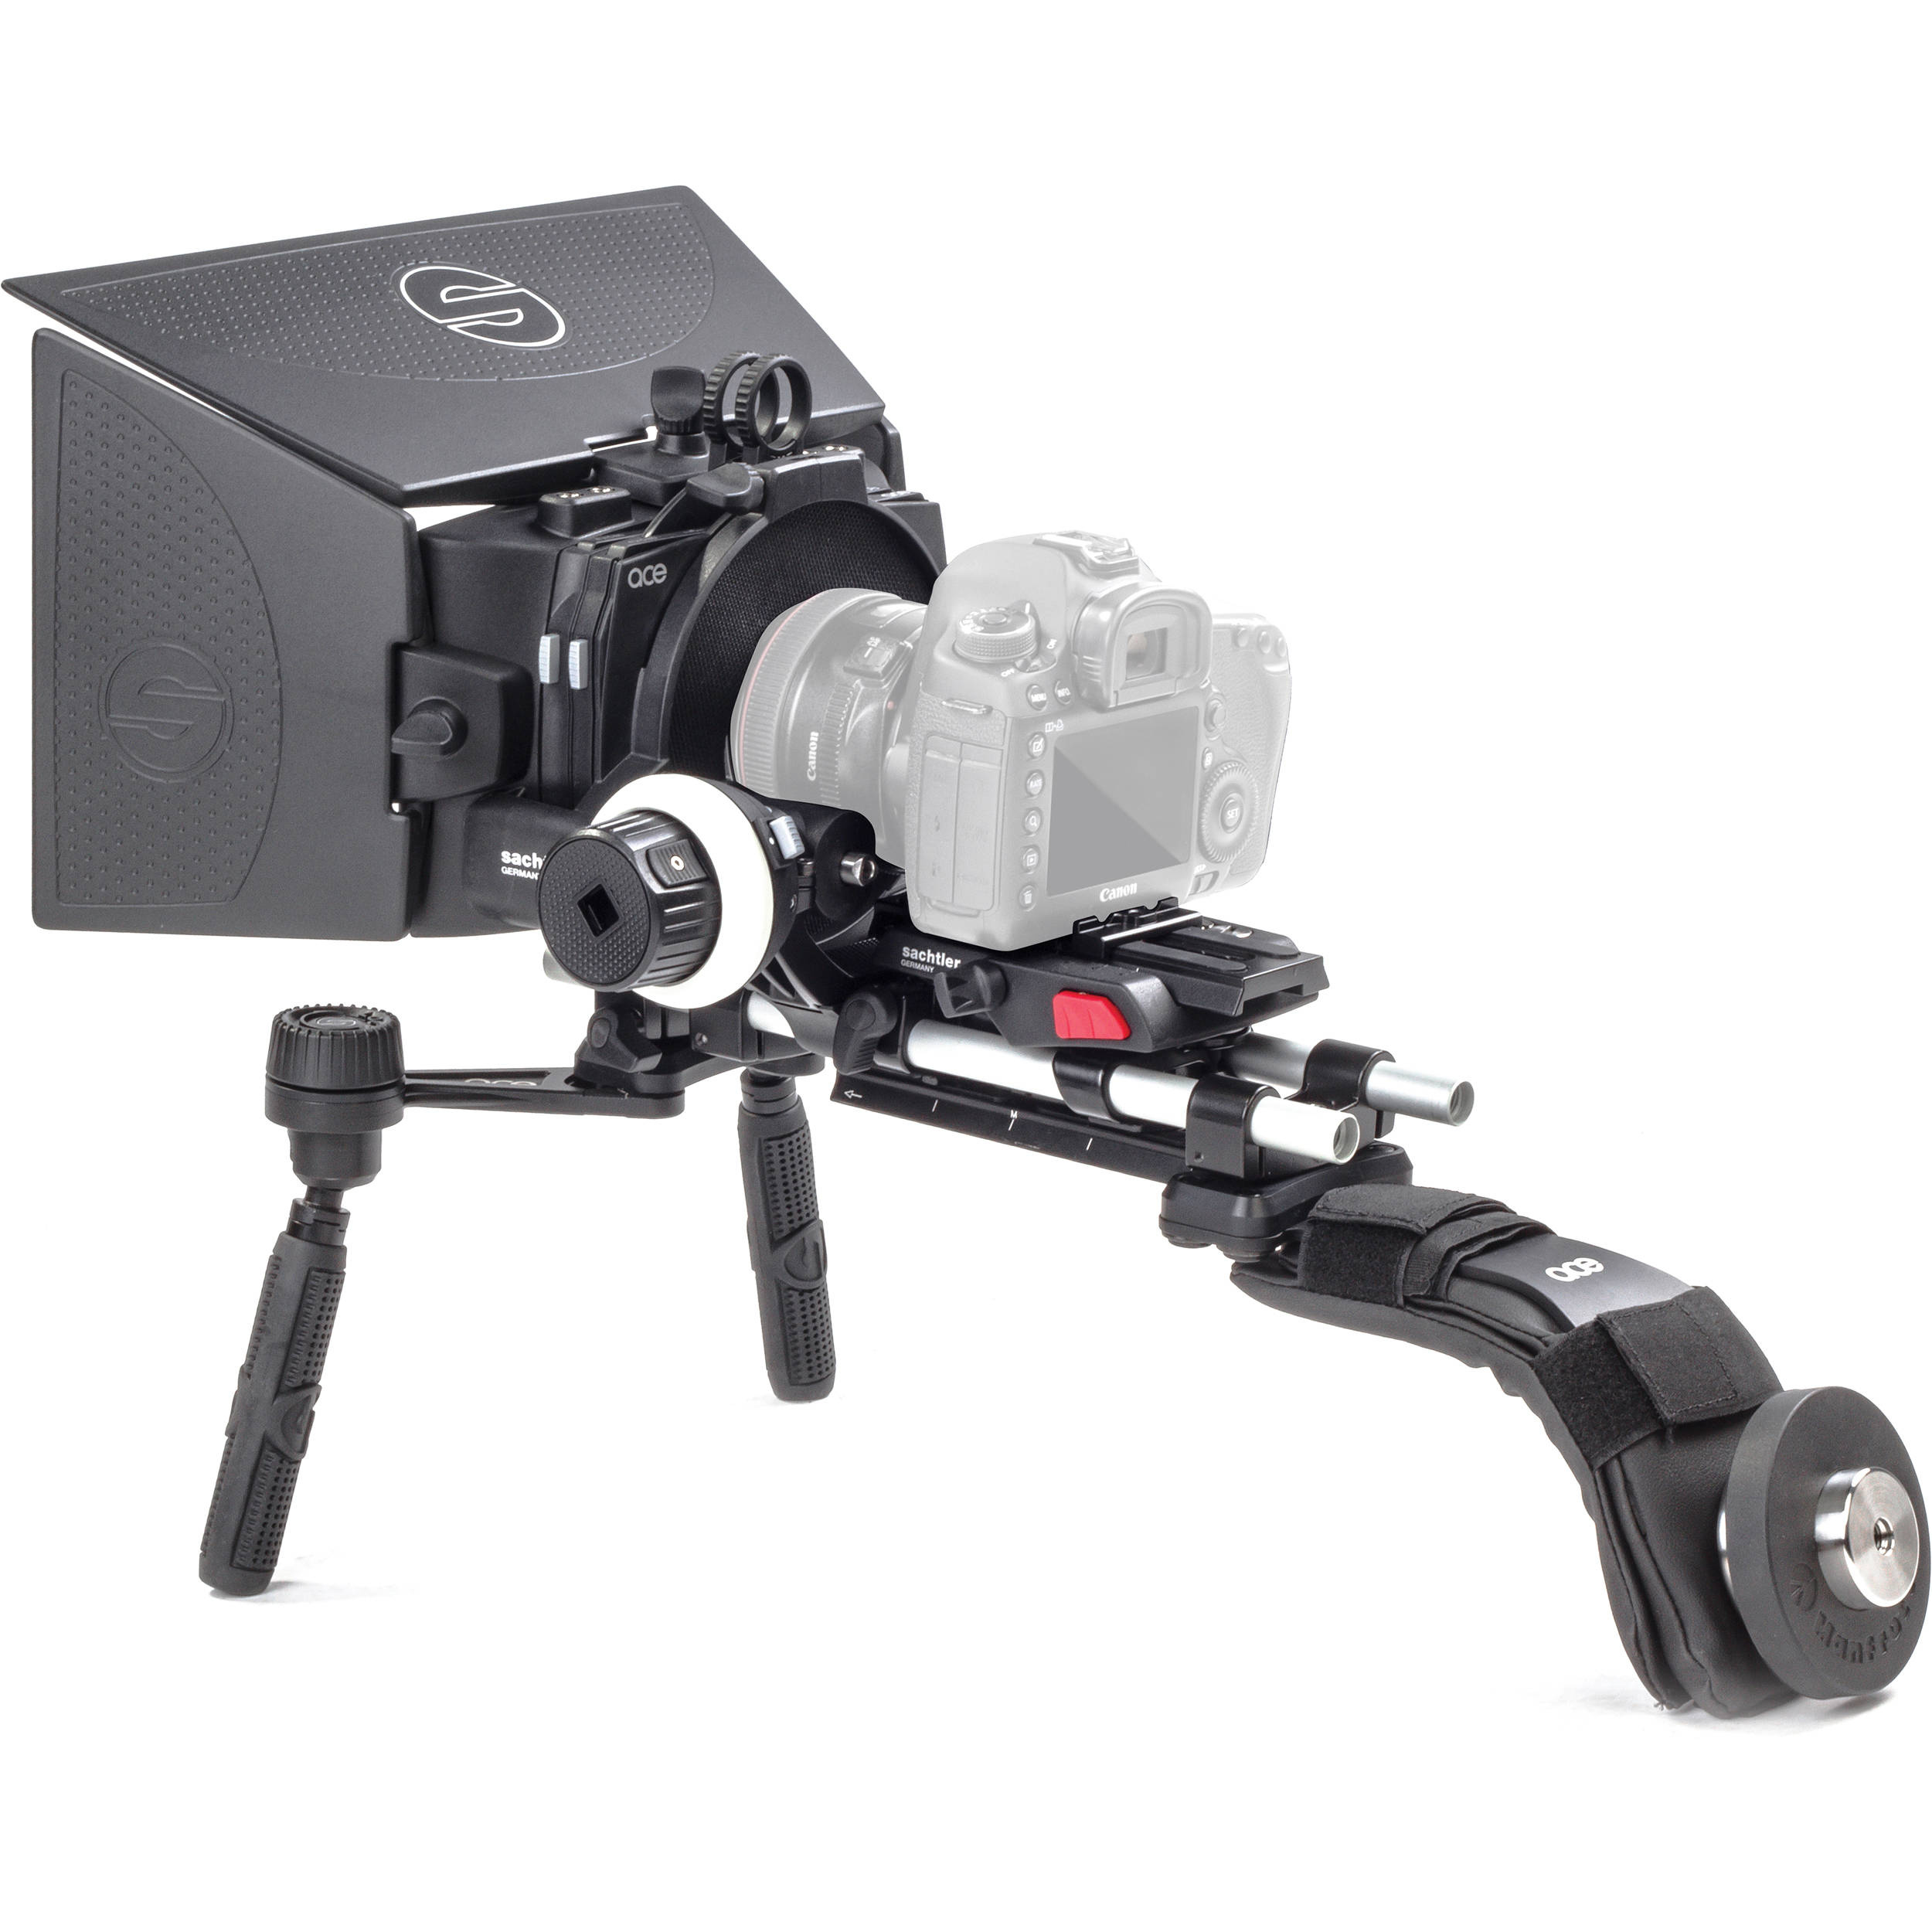 Sachtler Ace Accessories Kit with Shoulder Rig